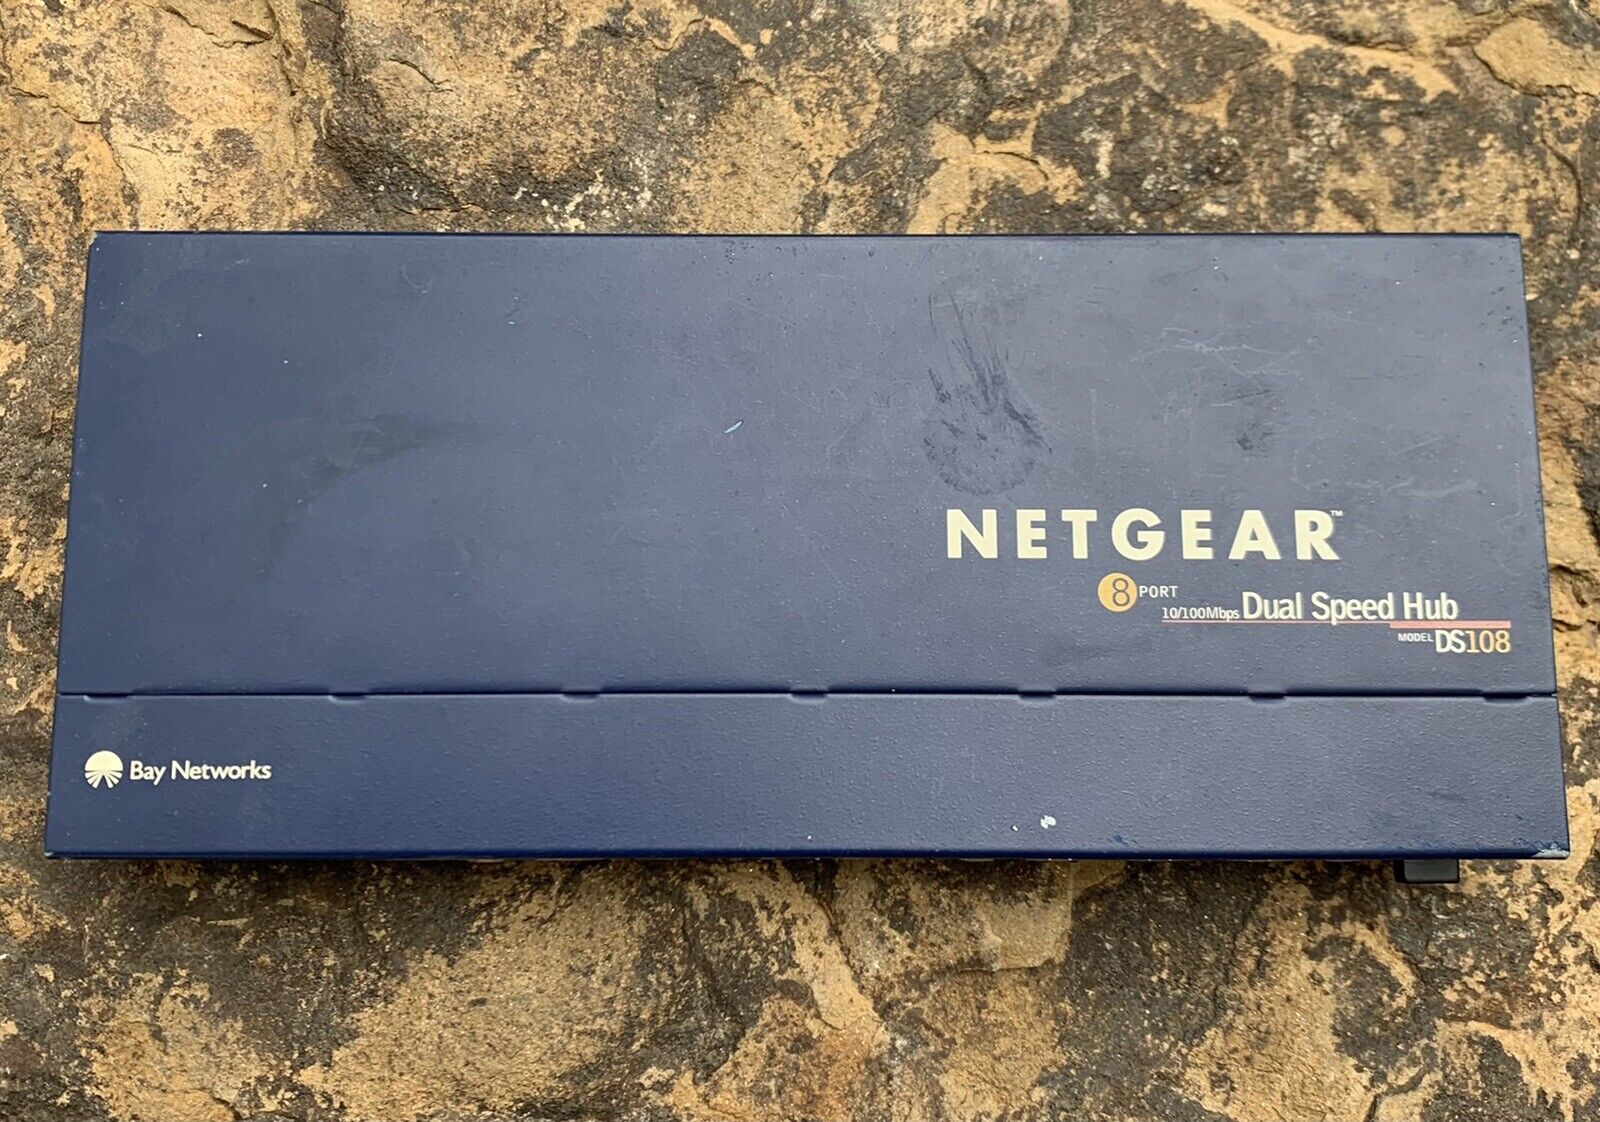  Netgear Dual Speed Hub DS108 Router. Good conditioned 